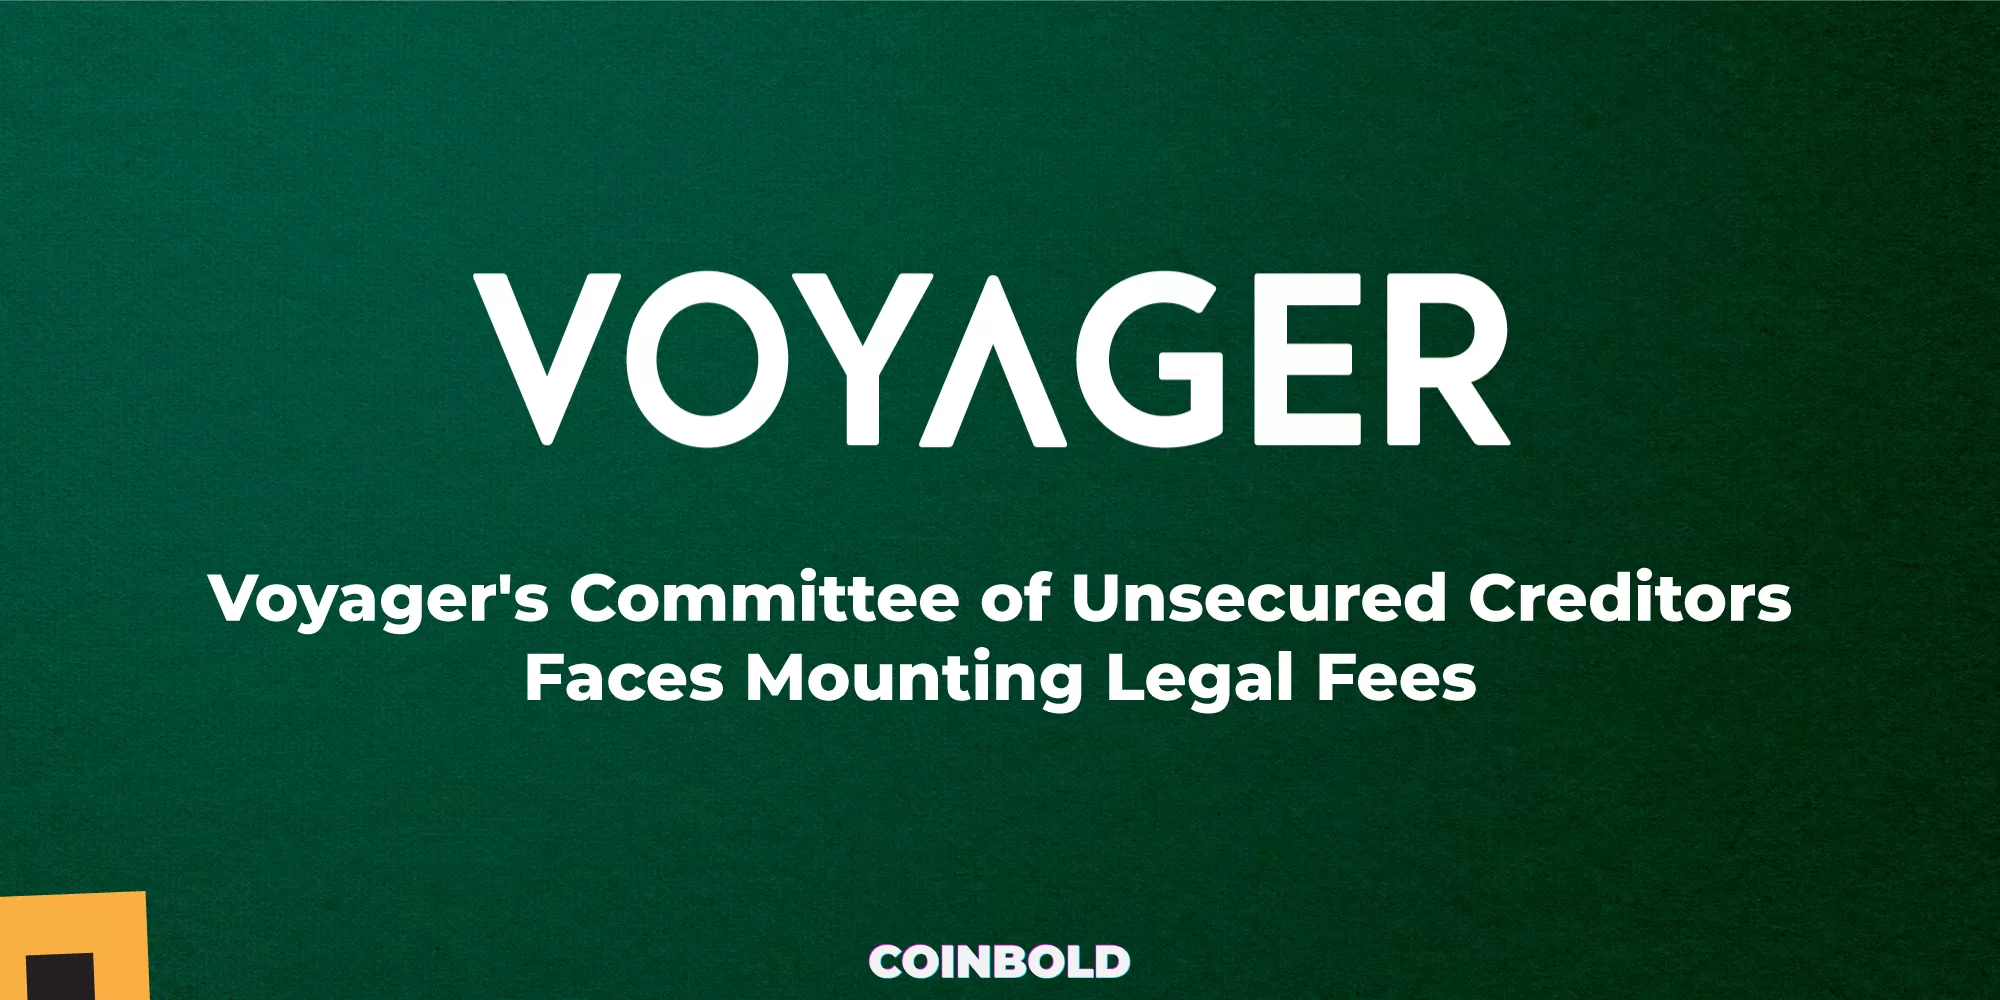 Voyager's Committee of Unsecured Creditors Faces Mounting Legal Fees